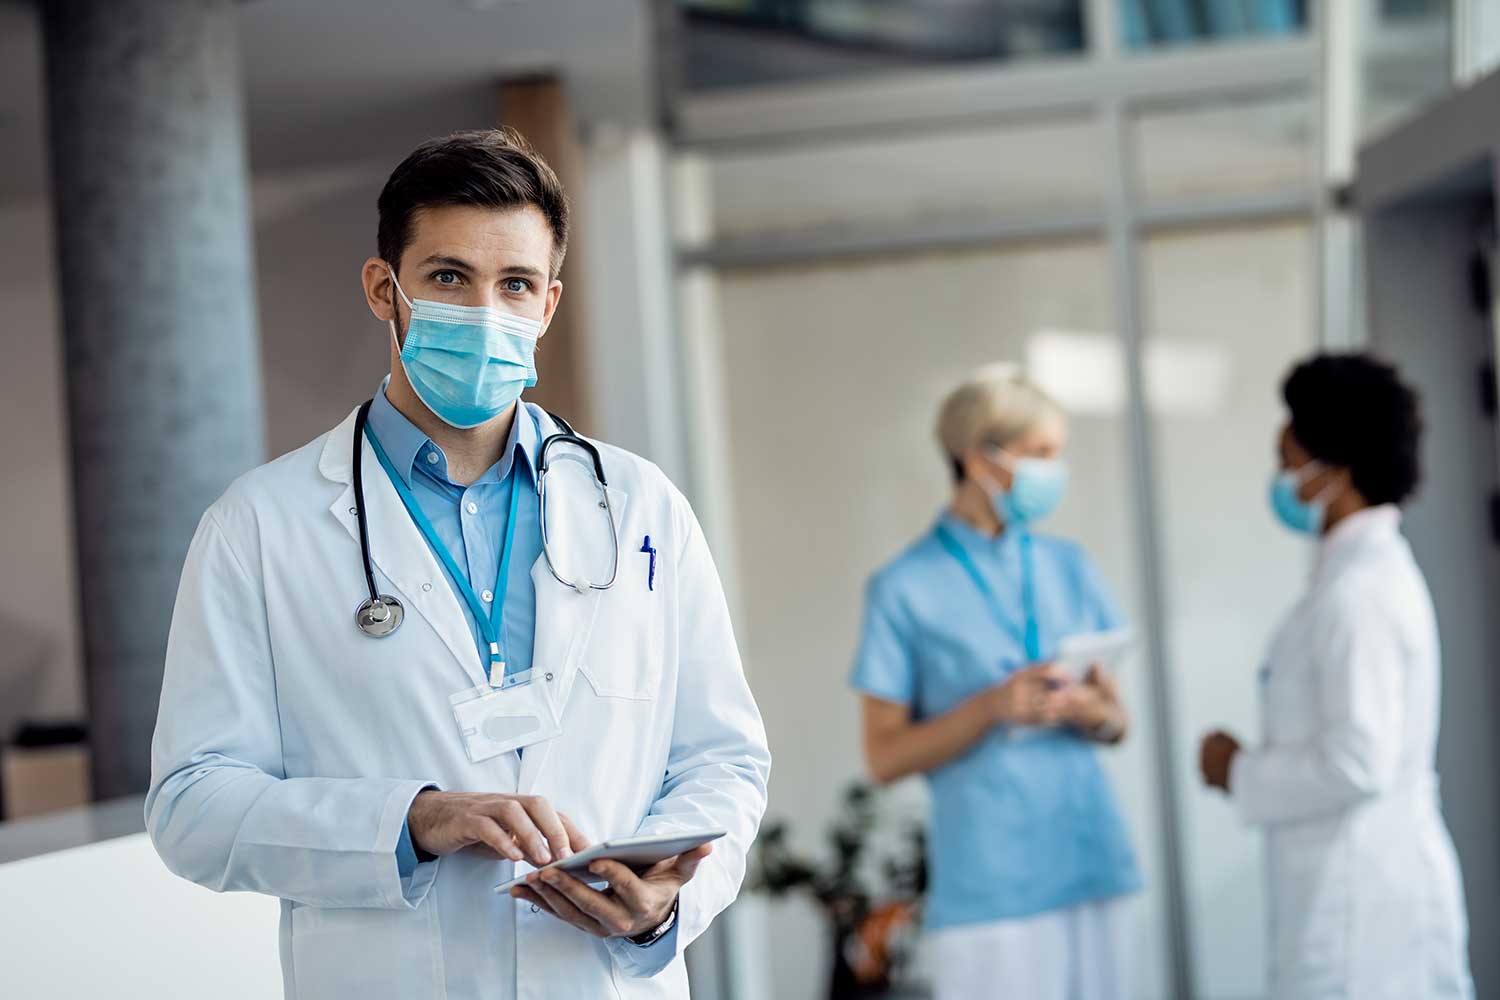 5G Network Resilience in healthcare network